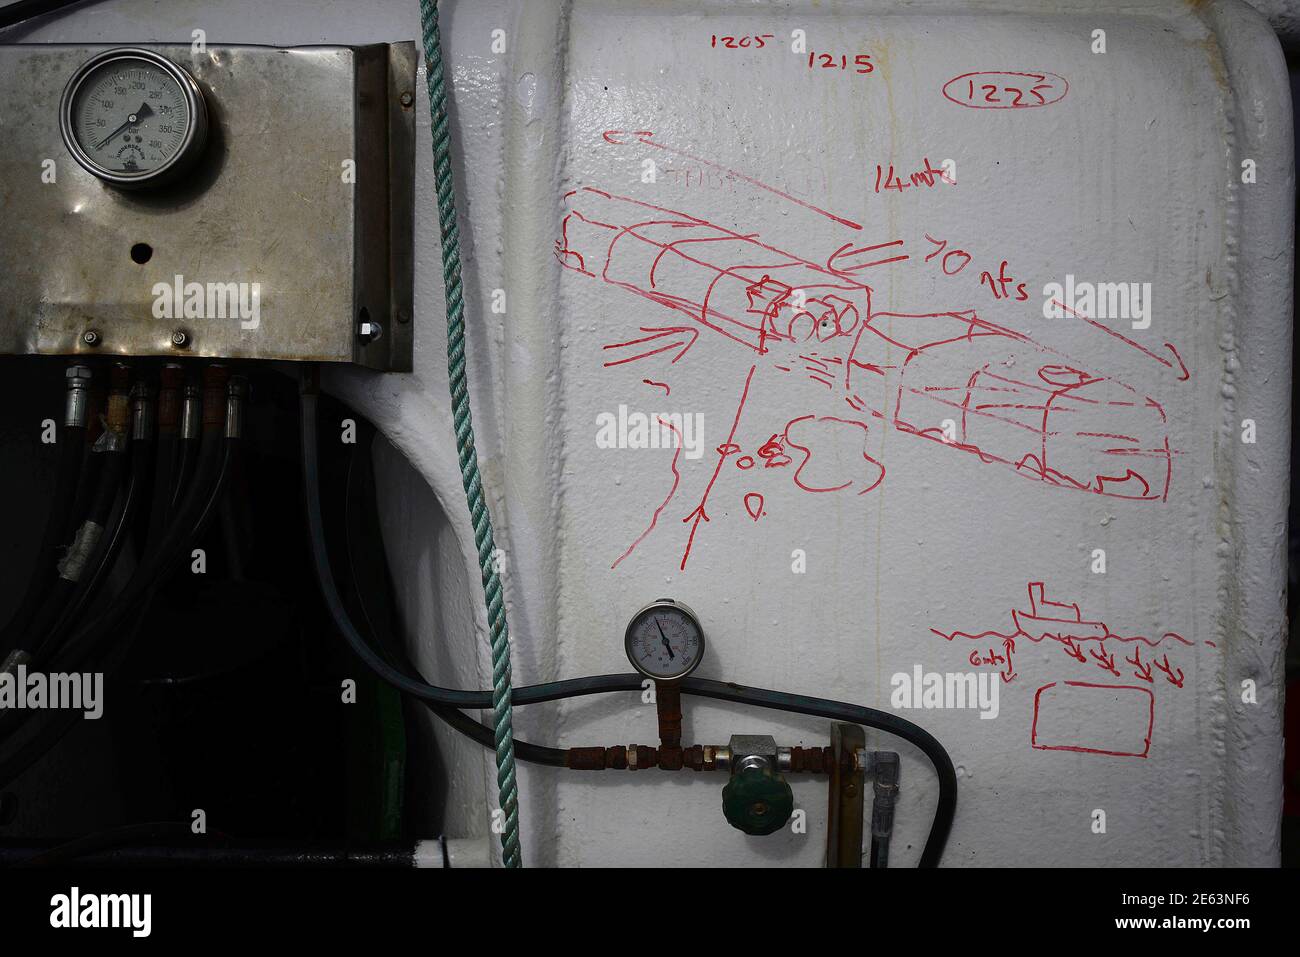 A dive plan of the Tabarka wreck is drawn on a dive boat at Scapa Flow in the Orkney Islands, Scotland May 6, 2014. During both World Wars, Scapa Flow was an important British naval base, and the site of significant loss of life. Following the end of World War One, 74 German warships were interned there, and on June 21, 1919 most were deliberately sunk, or scuttled, at the orders of German Rear Admiral Ludwig Von Reuter, who mistakenly thought that the Armistice had broken down and wanted to prevent the British from using the ships. Now Scapa Flow is a popular site for divers, who explore the  Stock Photo